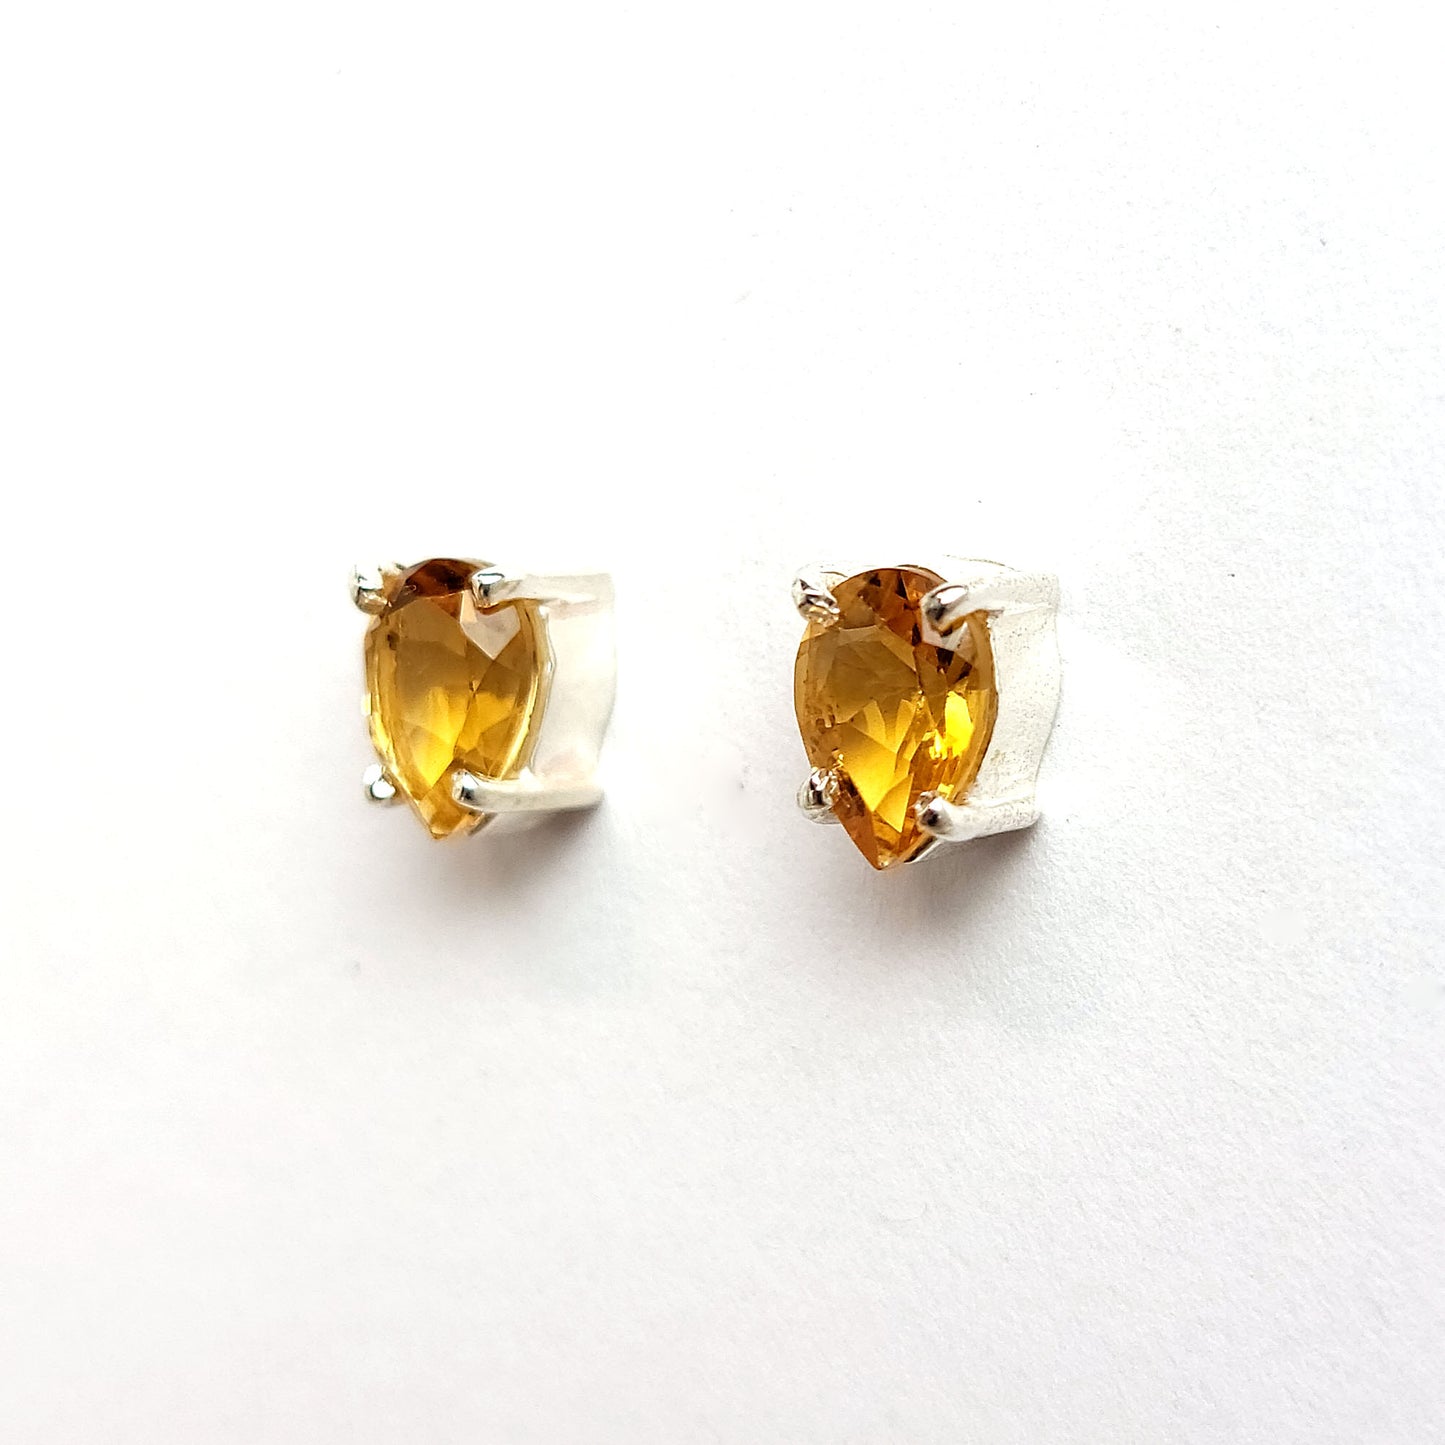 Earrings sterling solitaire - Citrine pear